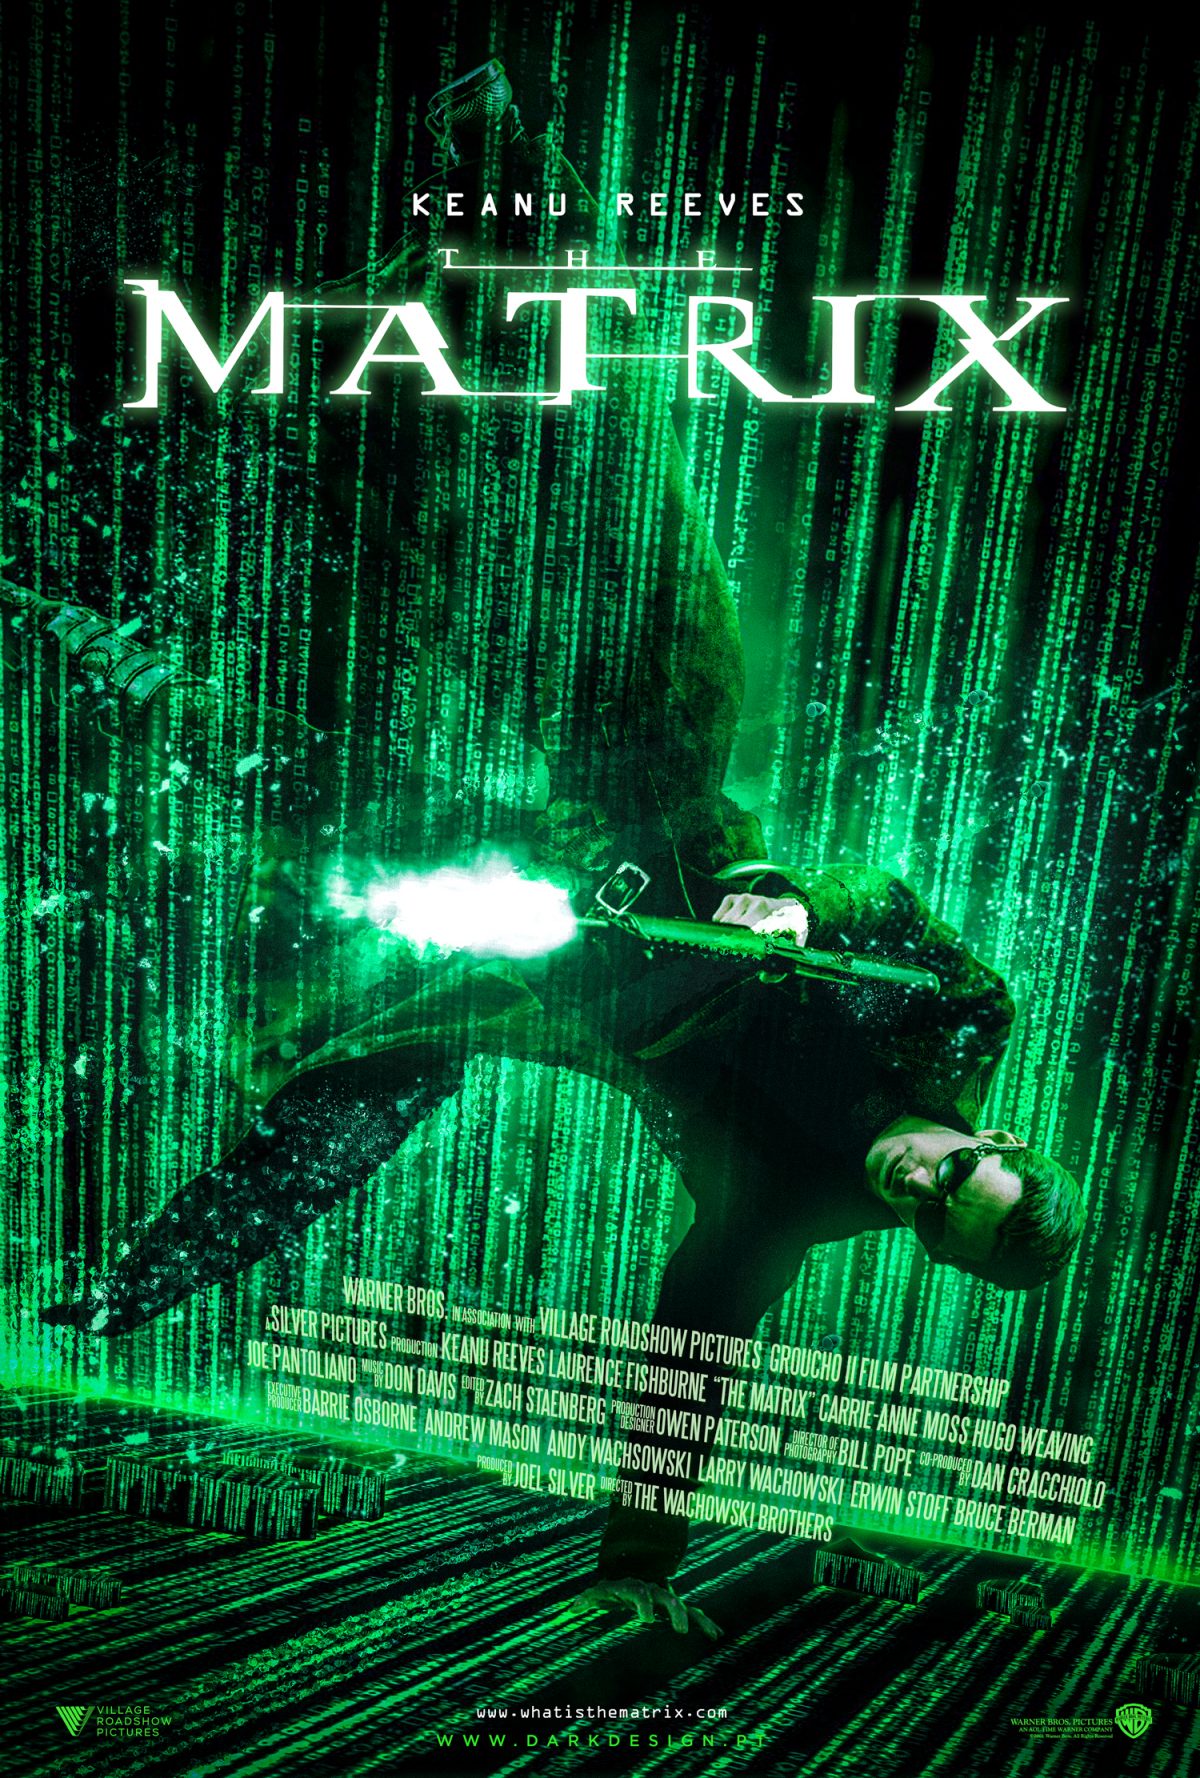 the-movies-database-posters-matrix-reloaded-2003